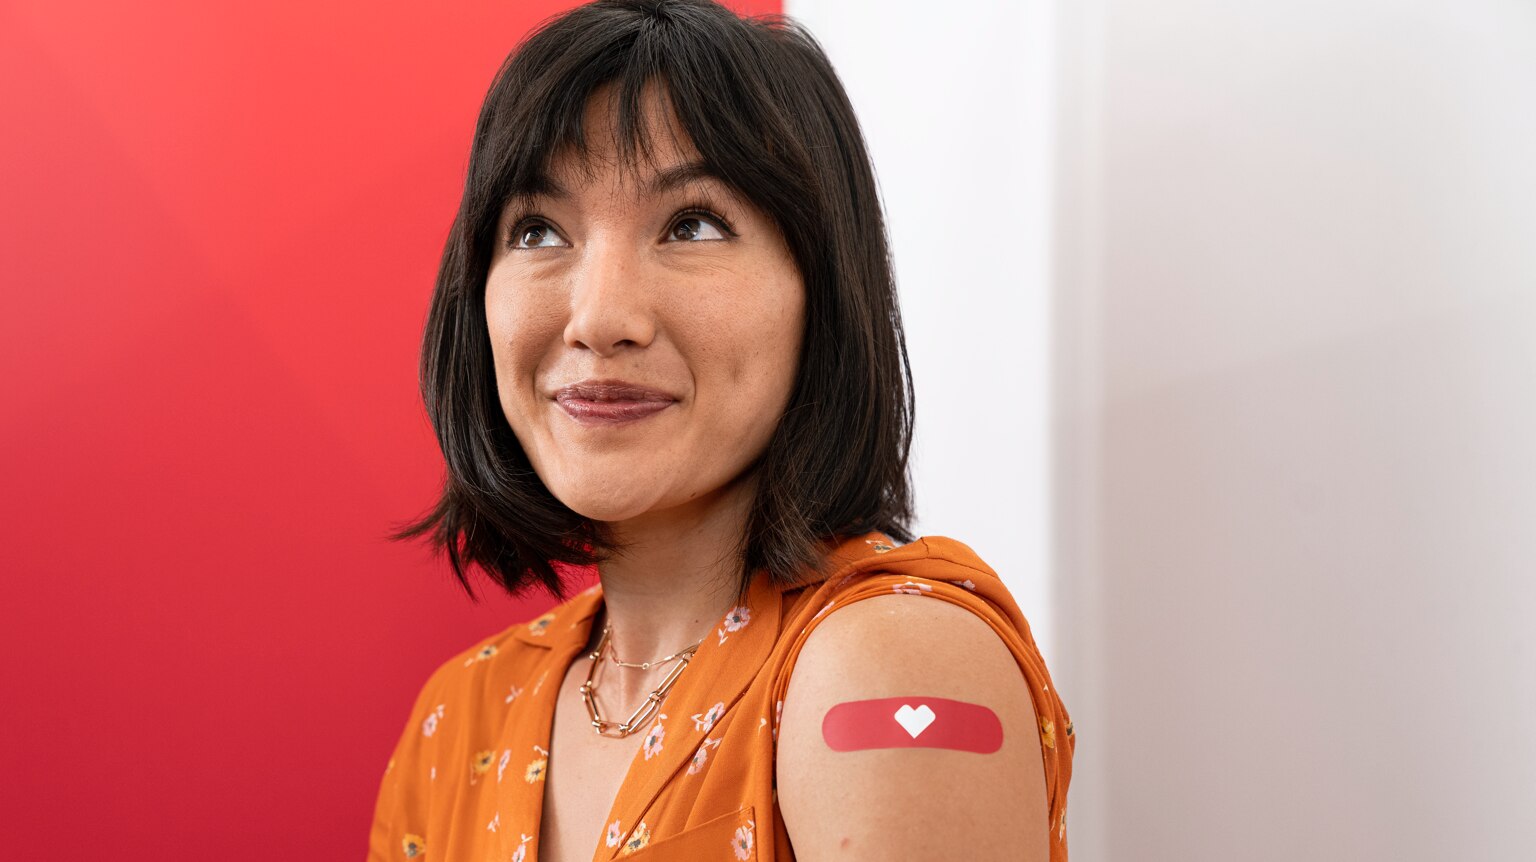 Smiling female patient with CVS bandage on arm after receiving flu shot